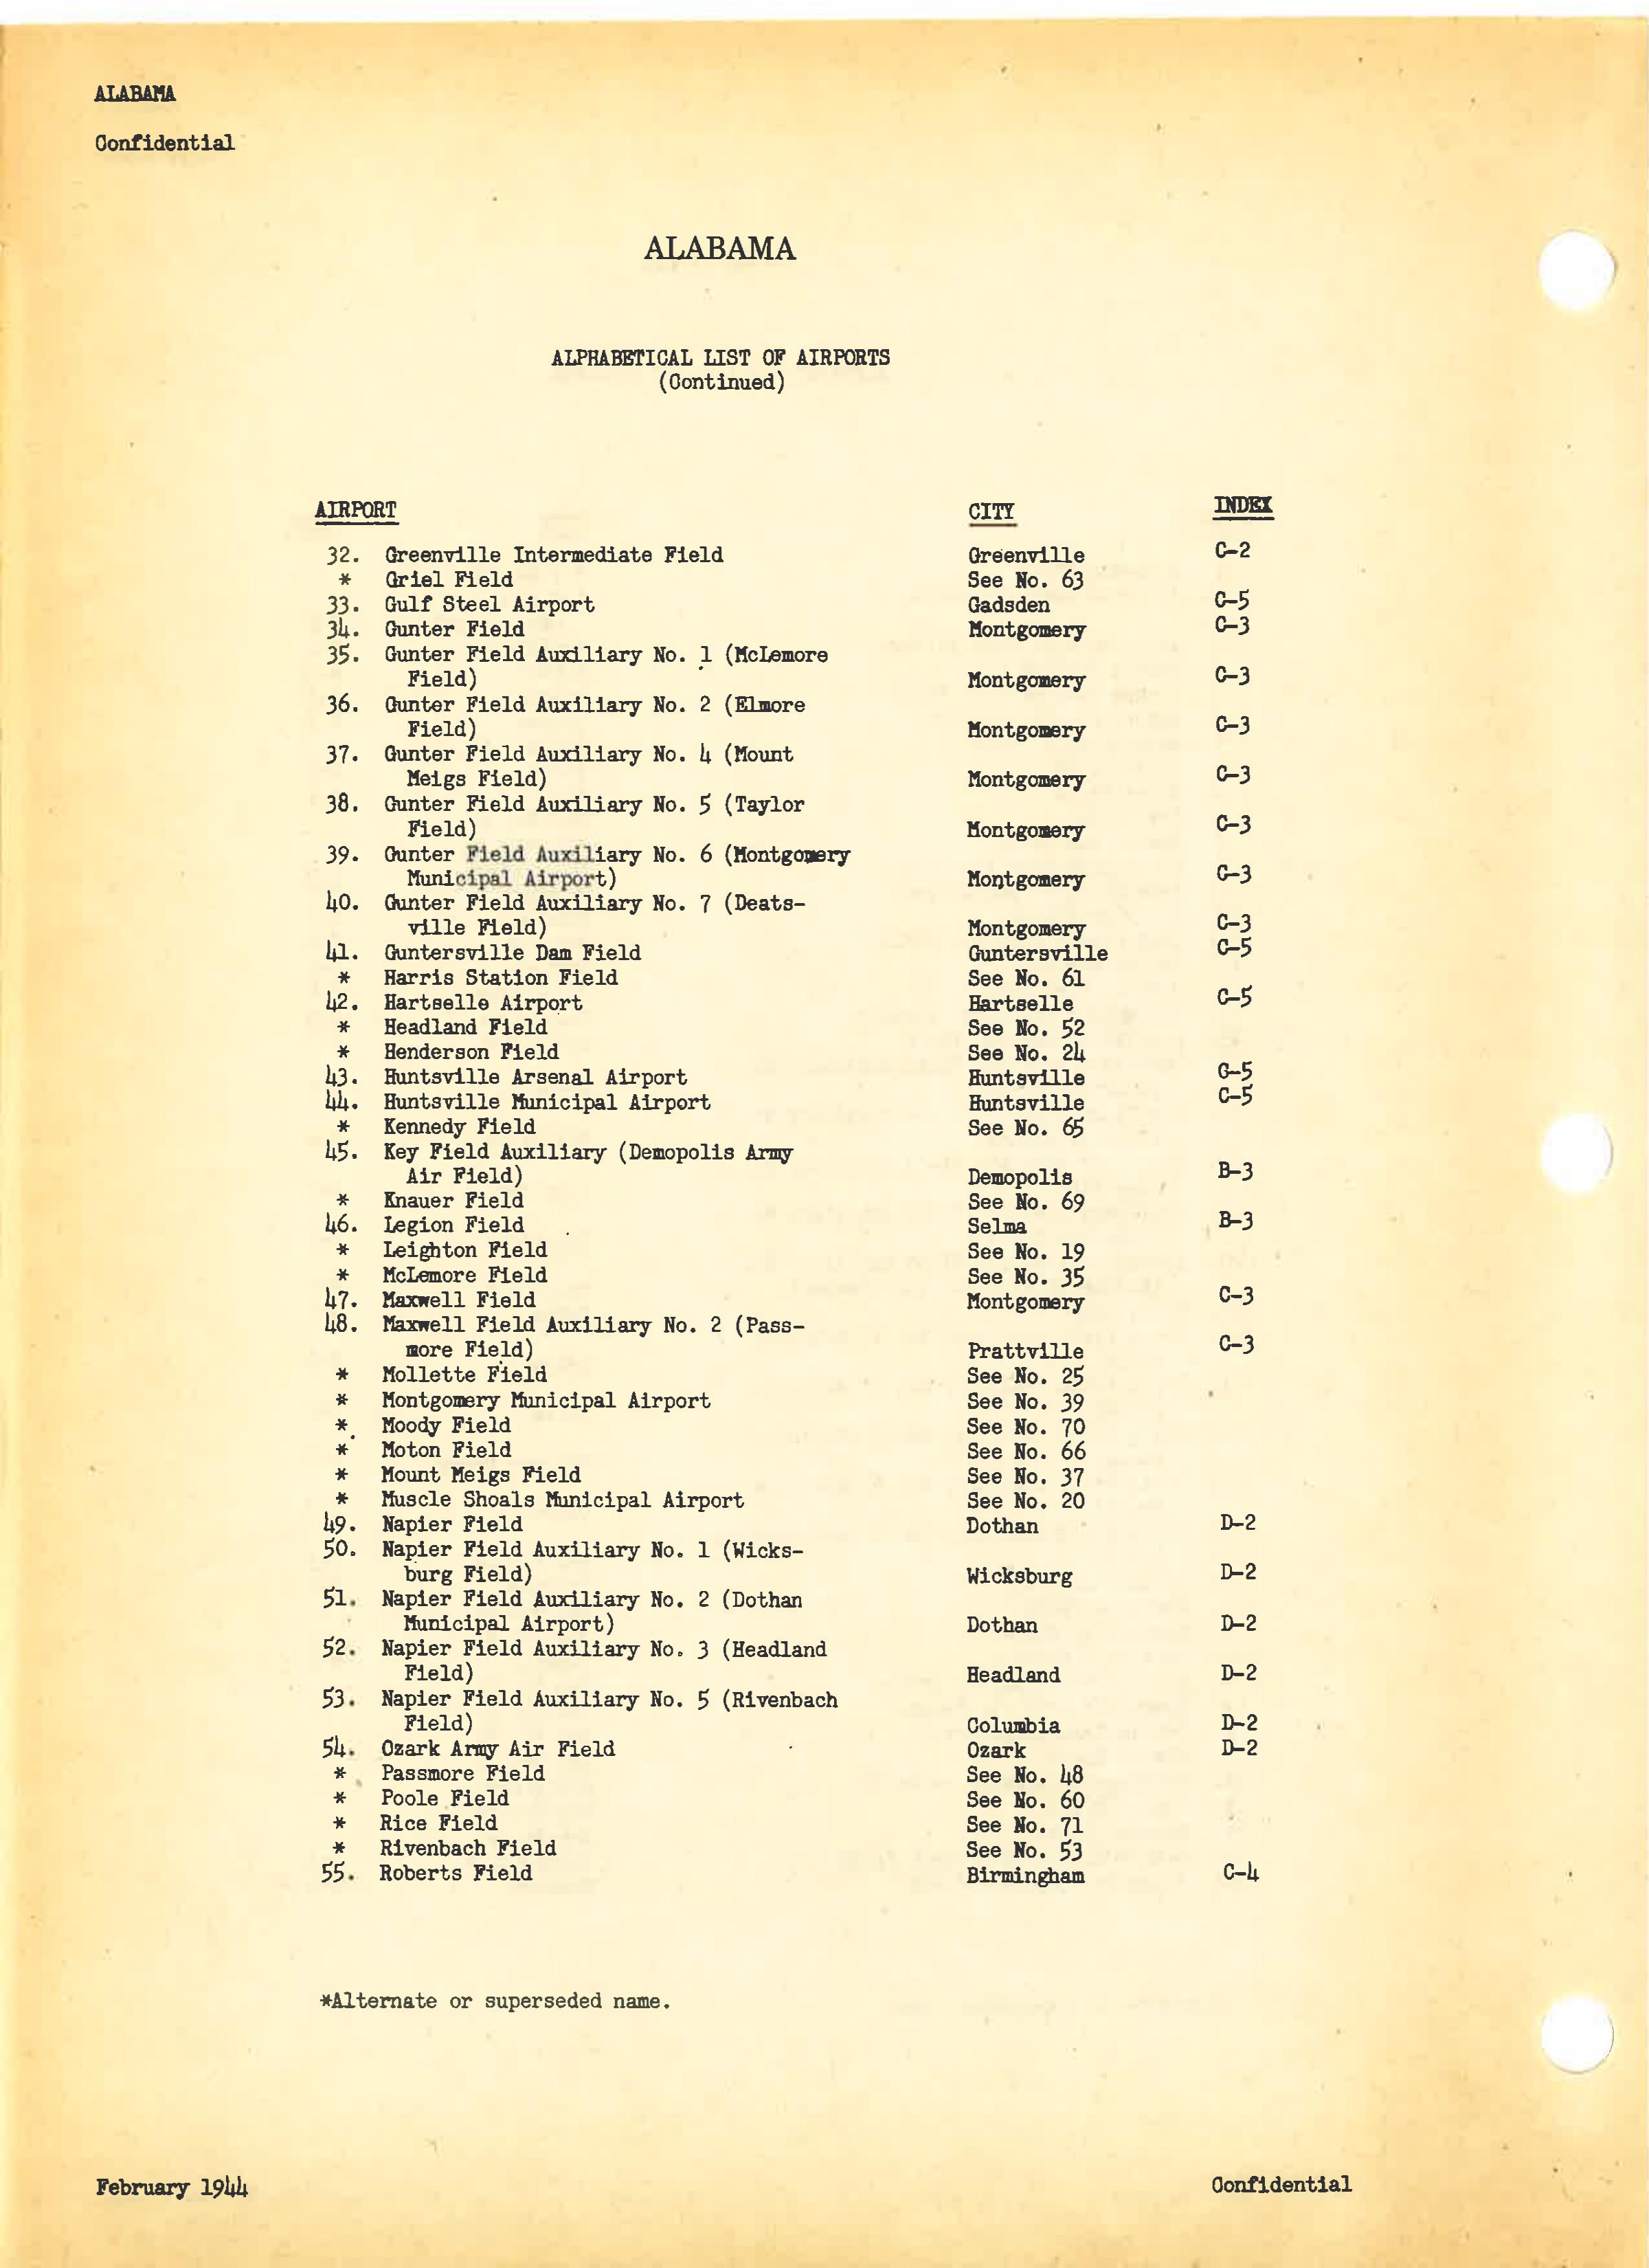 Sample page 11 from AirCorps Library document: Airport Directory of the Continental United States Vol. 1 (AL thru KY)